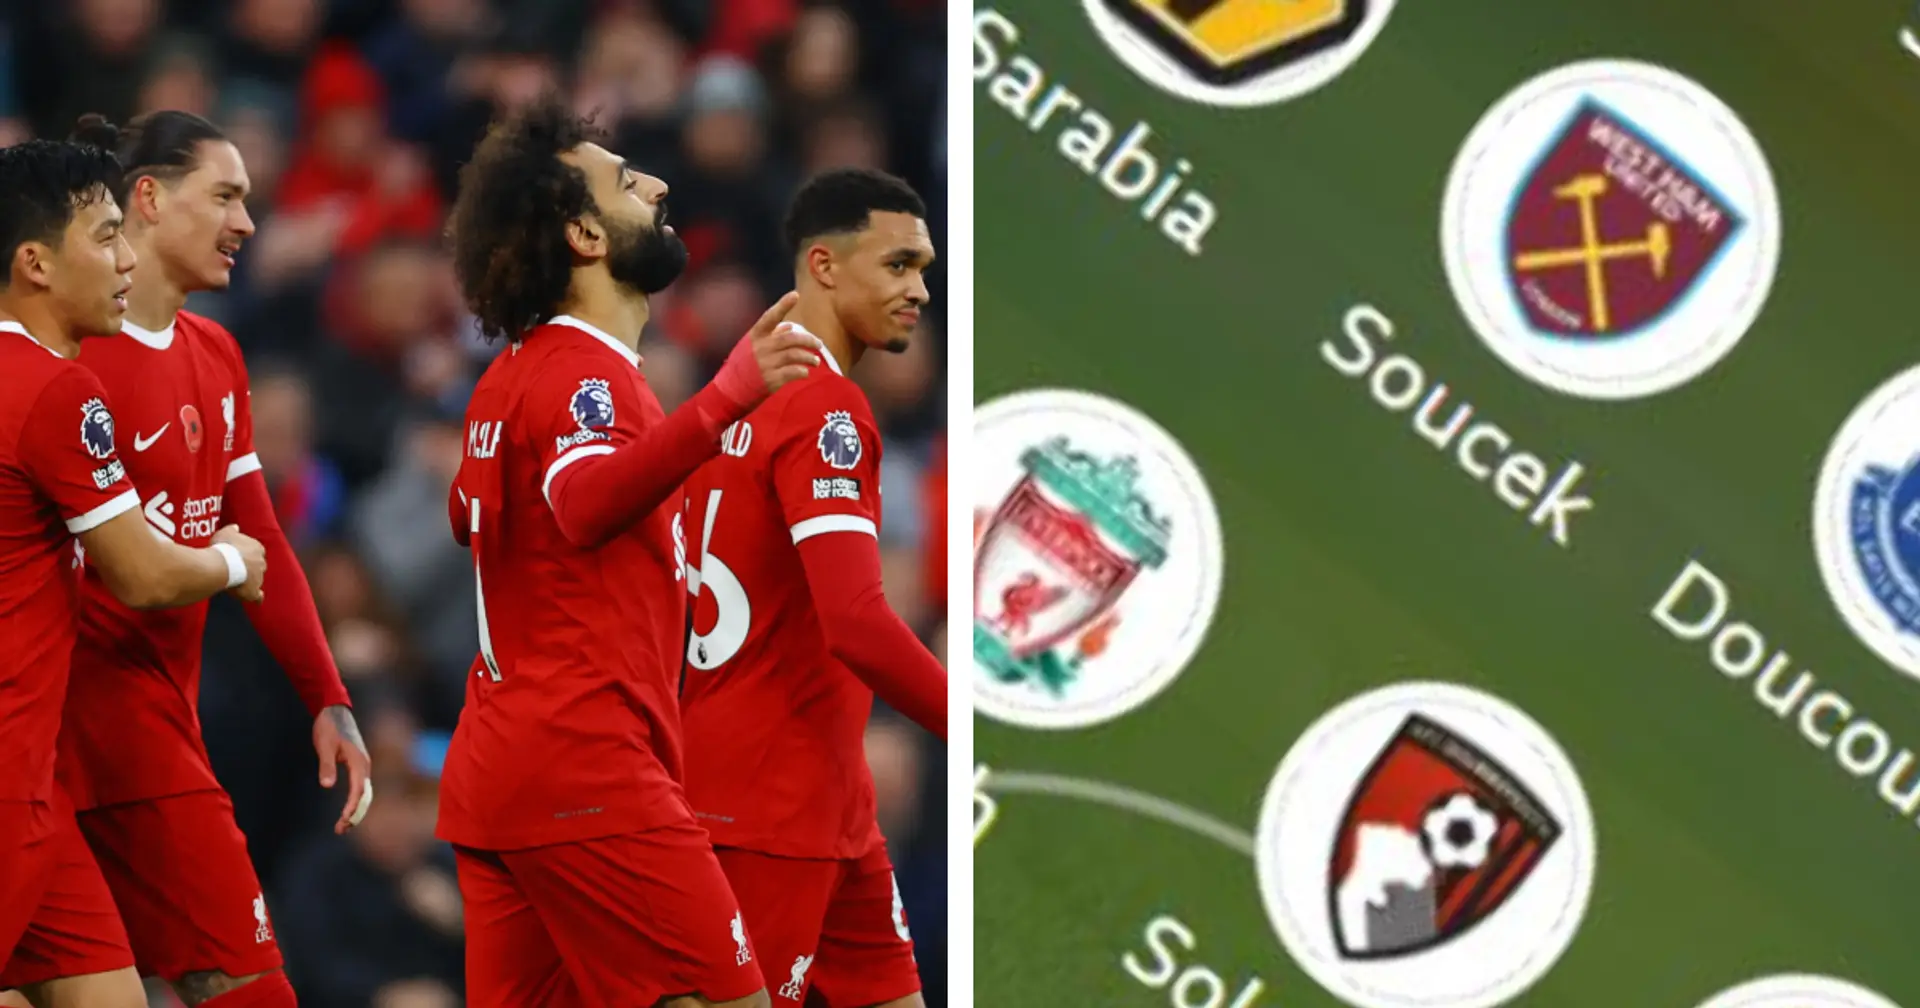 'Halted Liverpool's recent blip': two Anfield stars make BBC's Team of the Week after Brentford win